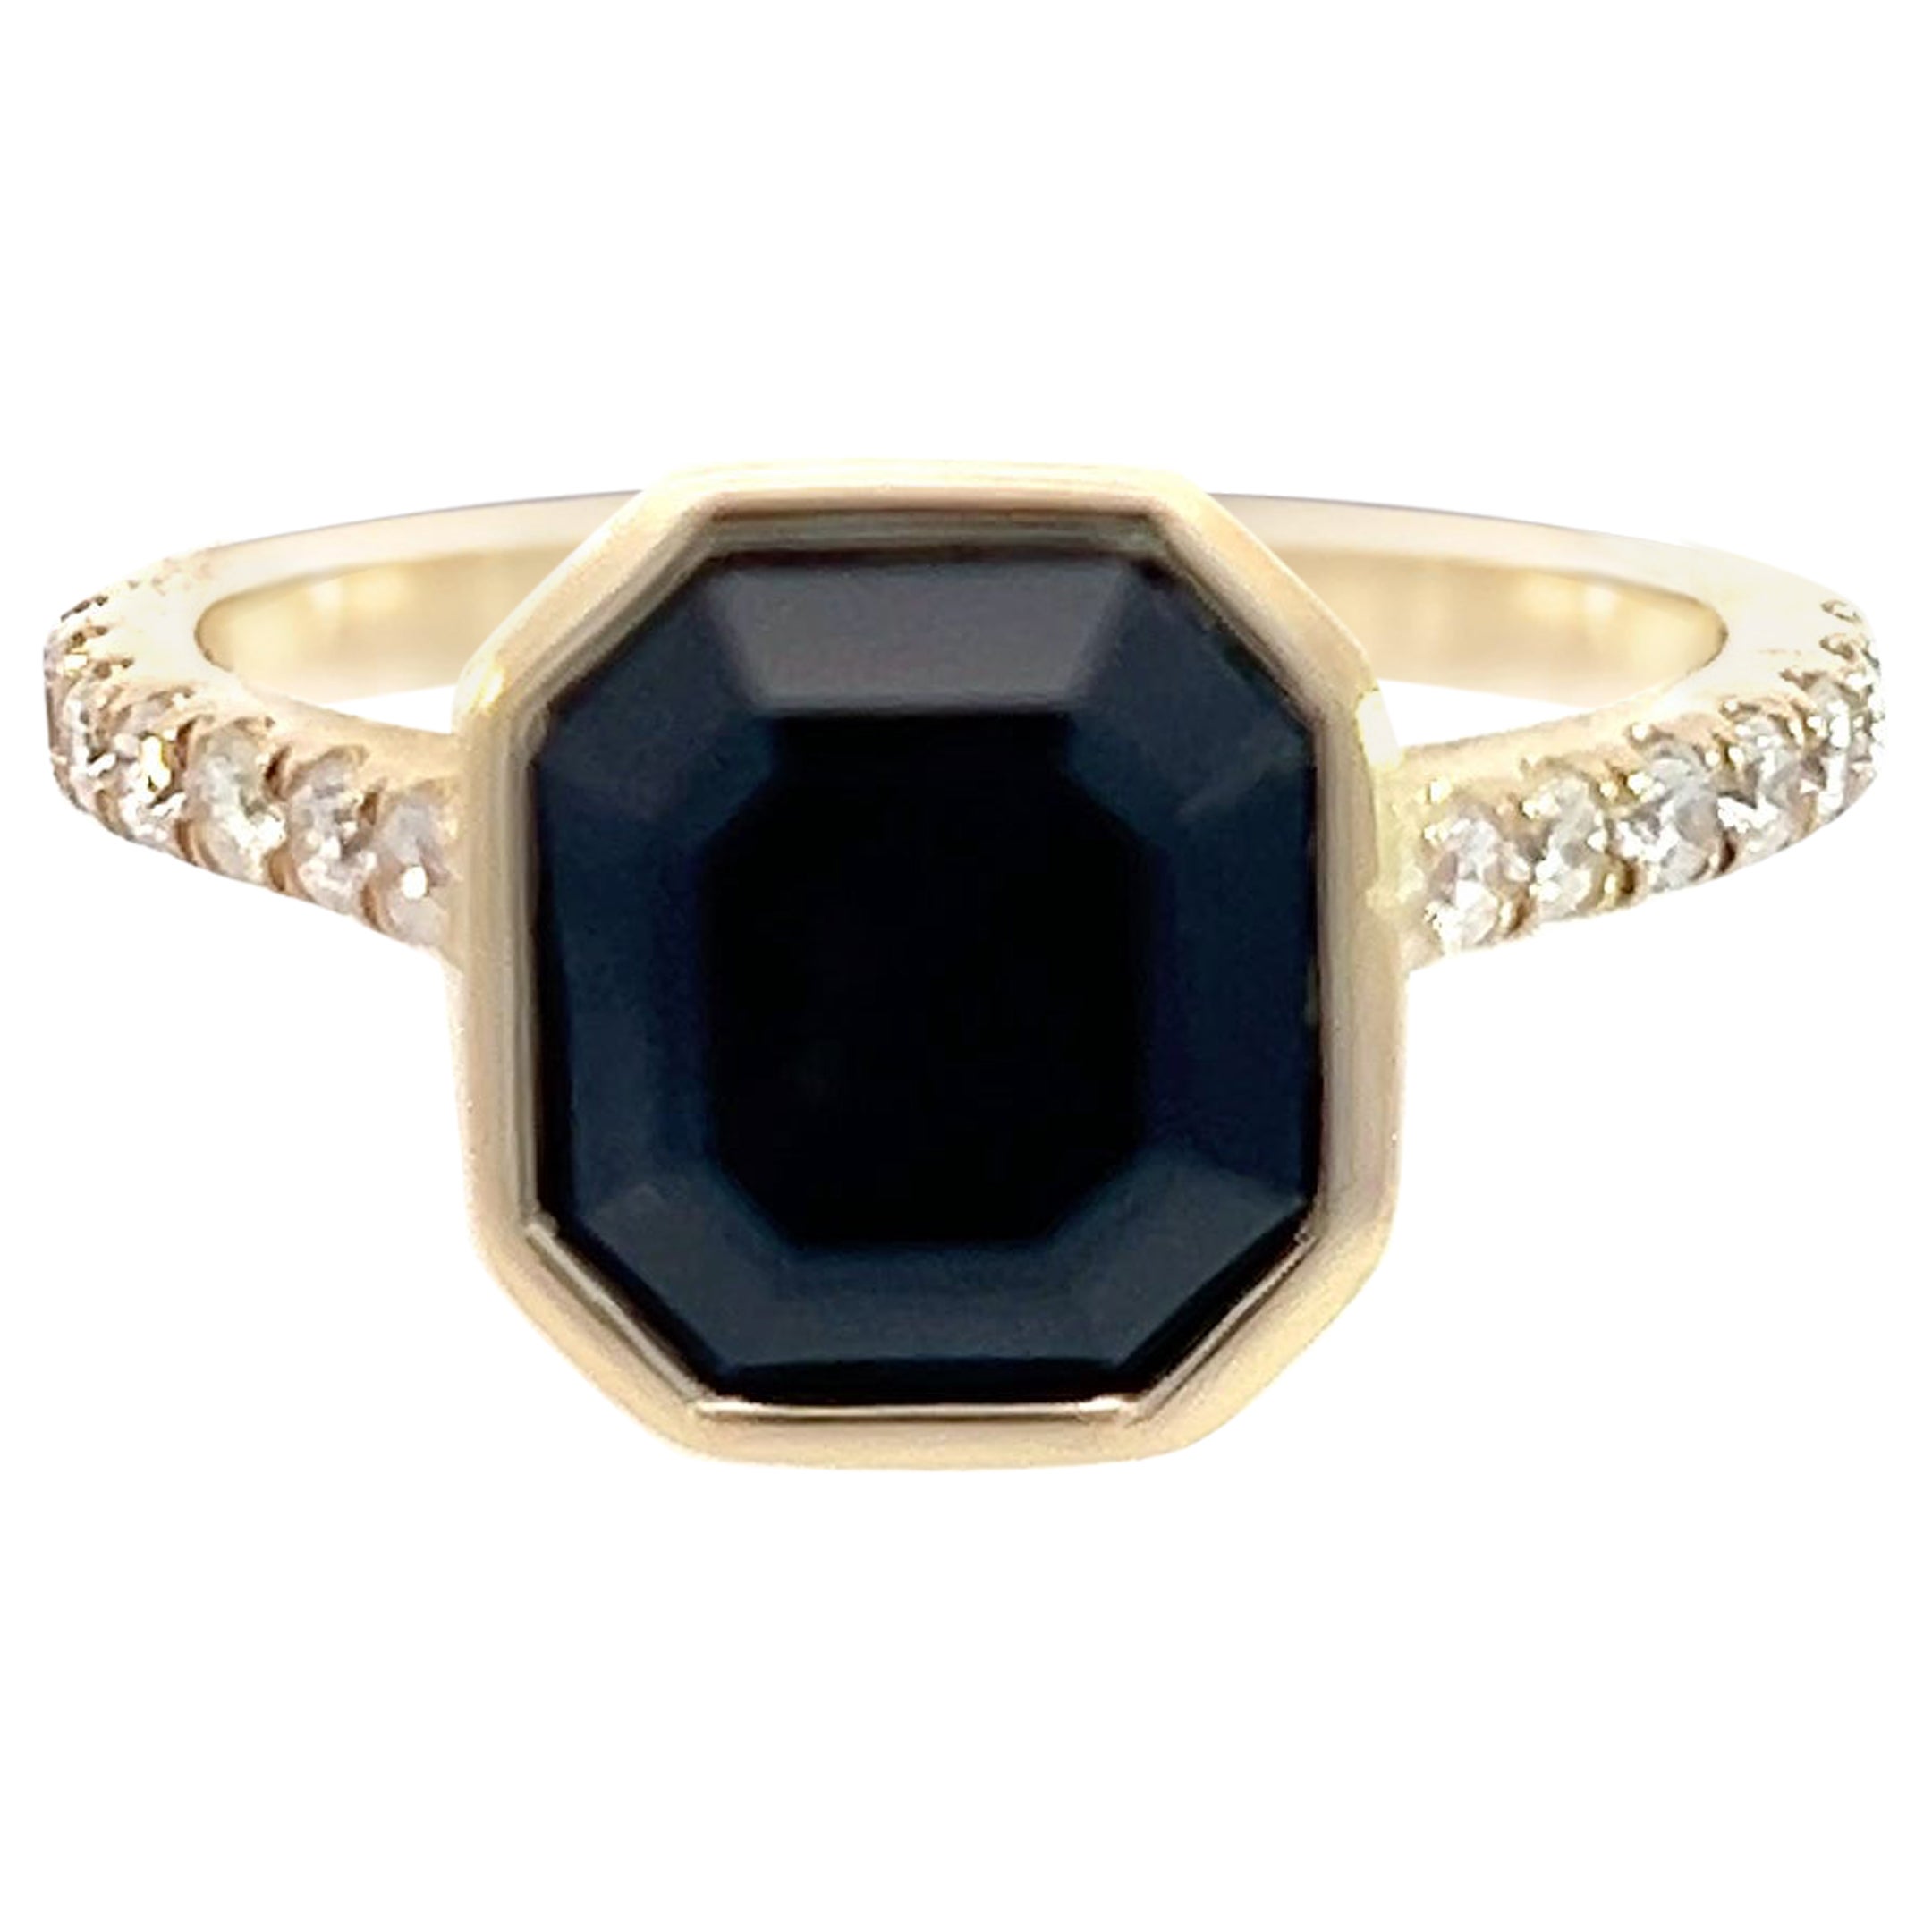 Natural Sapphire Diamond Ring 6.75 14k Yellow Gold 4.65 TCW Certified